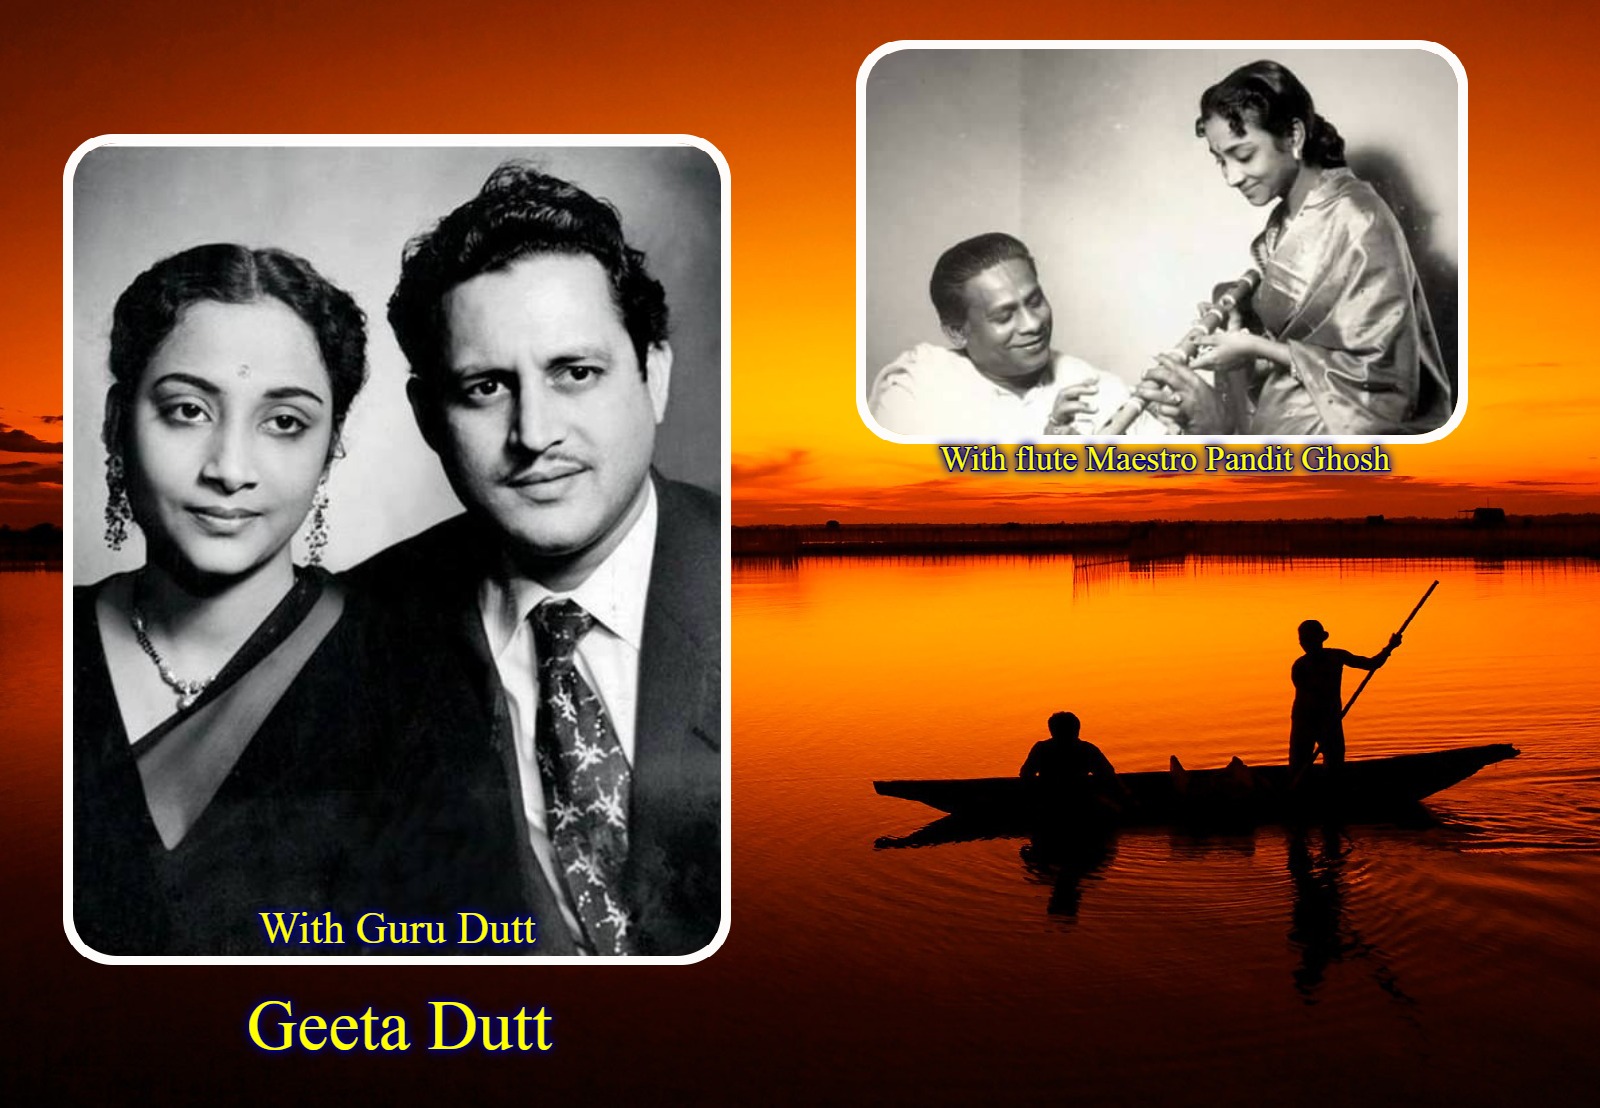 Read more about the article “Popular Classical Singer Who Lived An Unhappy Life- Geeta Dutt”